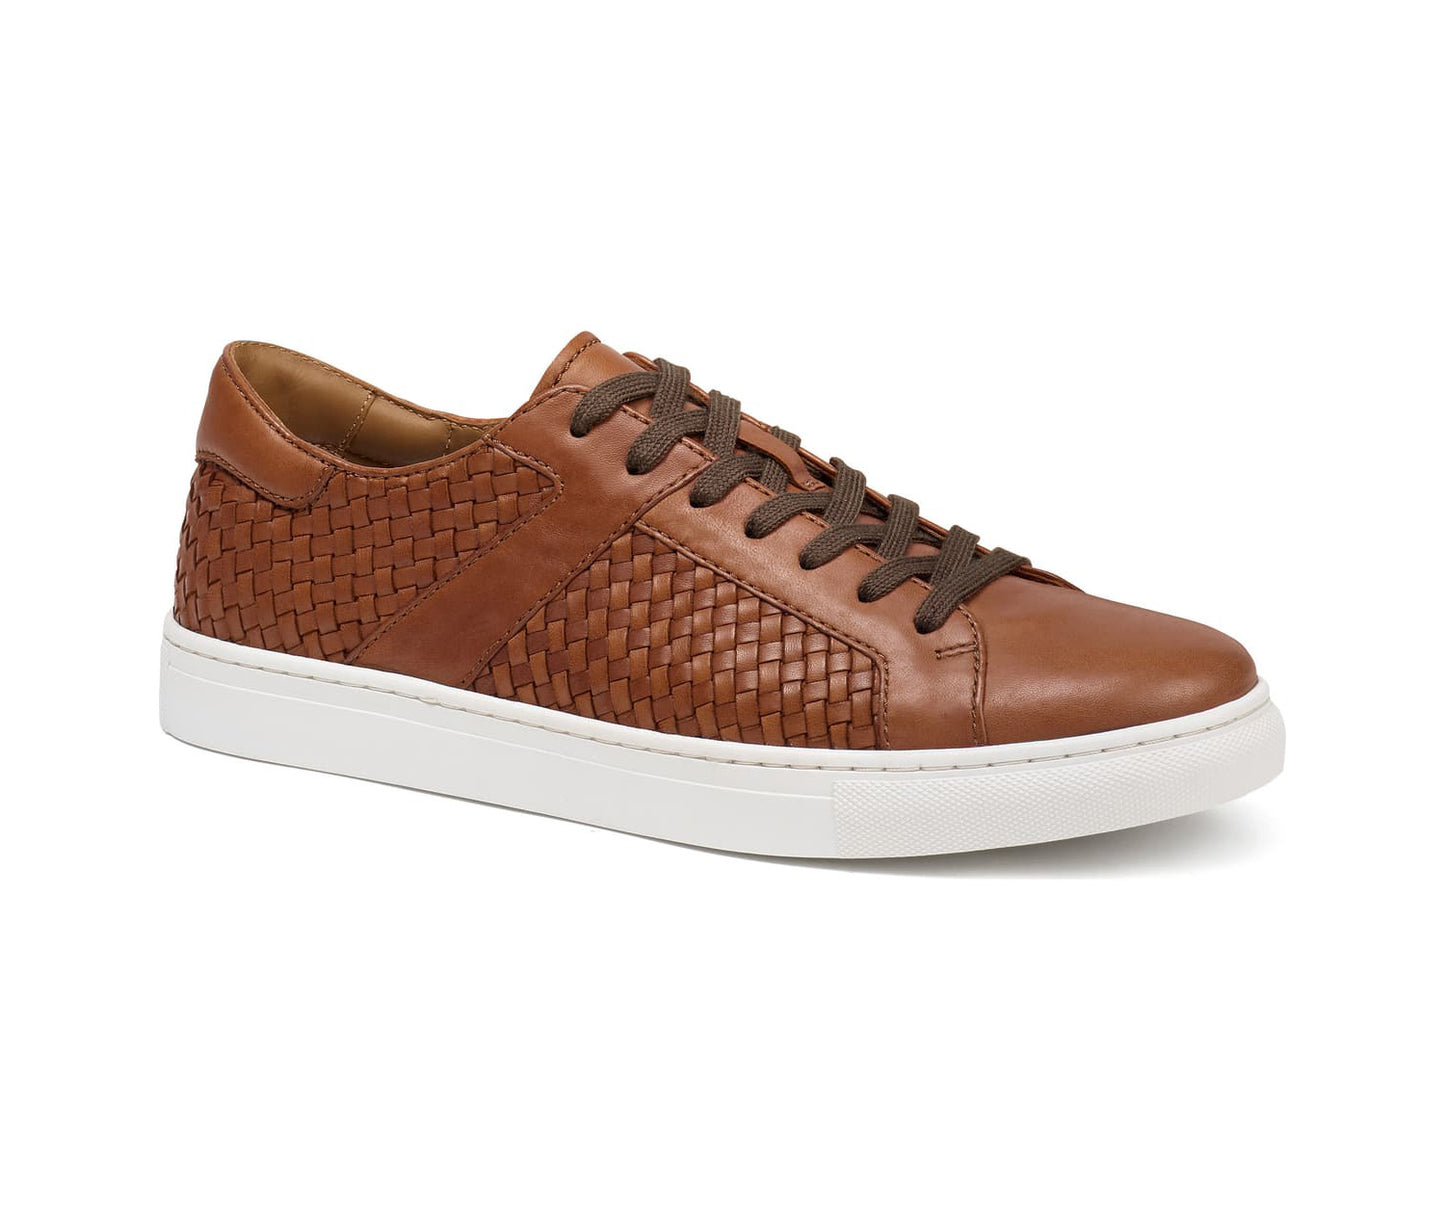 Brown Low Top Leather Sneaker for Men | The Royale Peacock UK 9